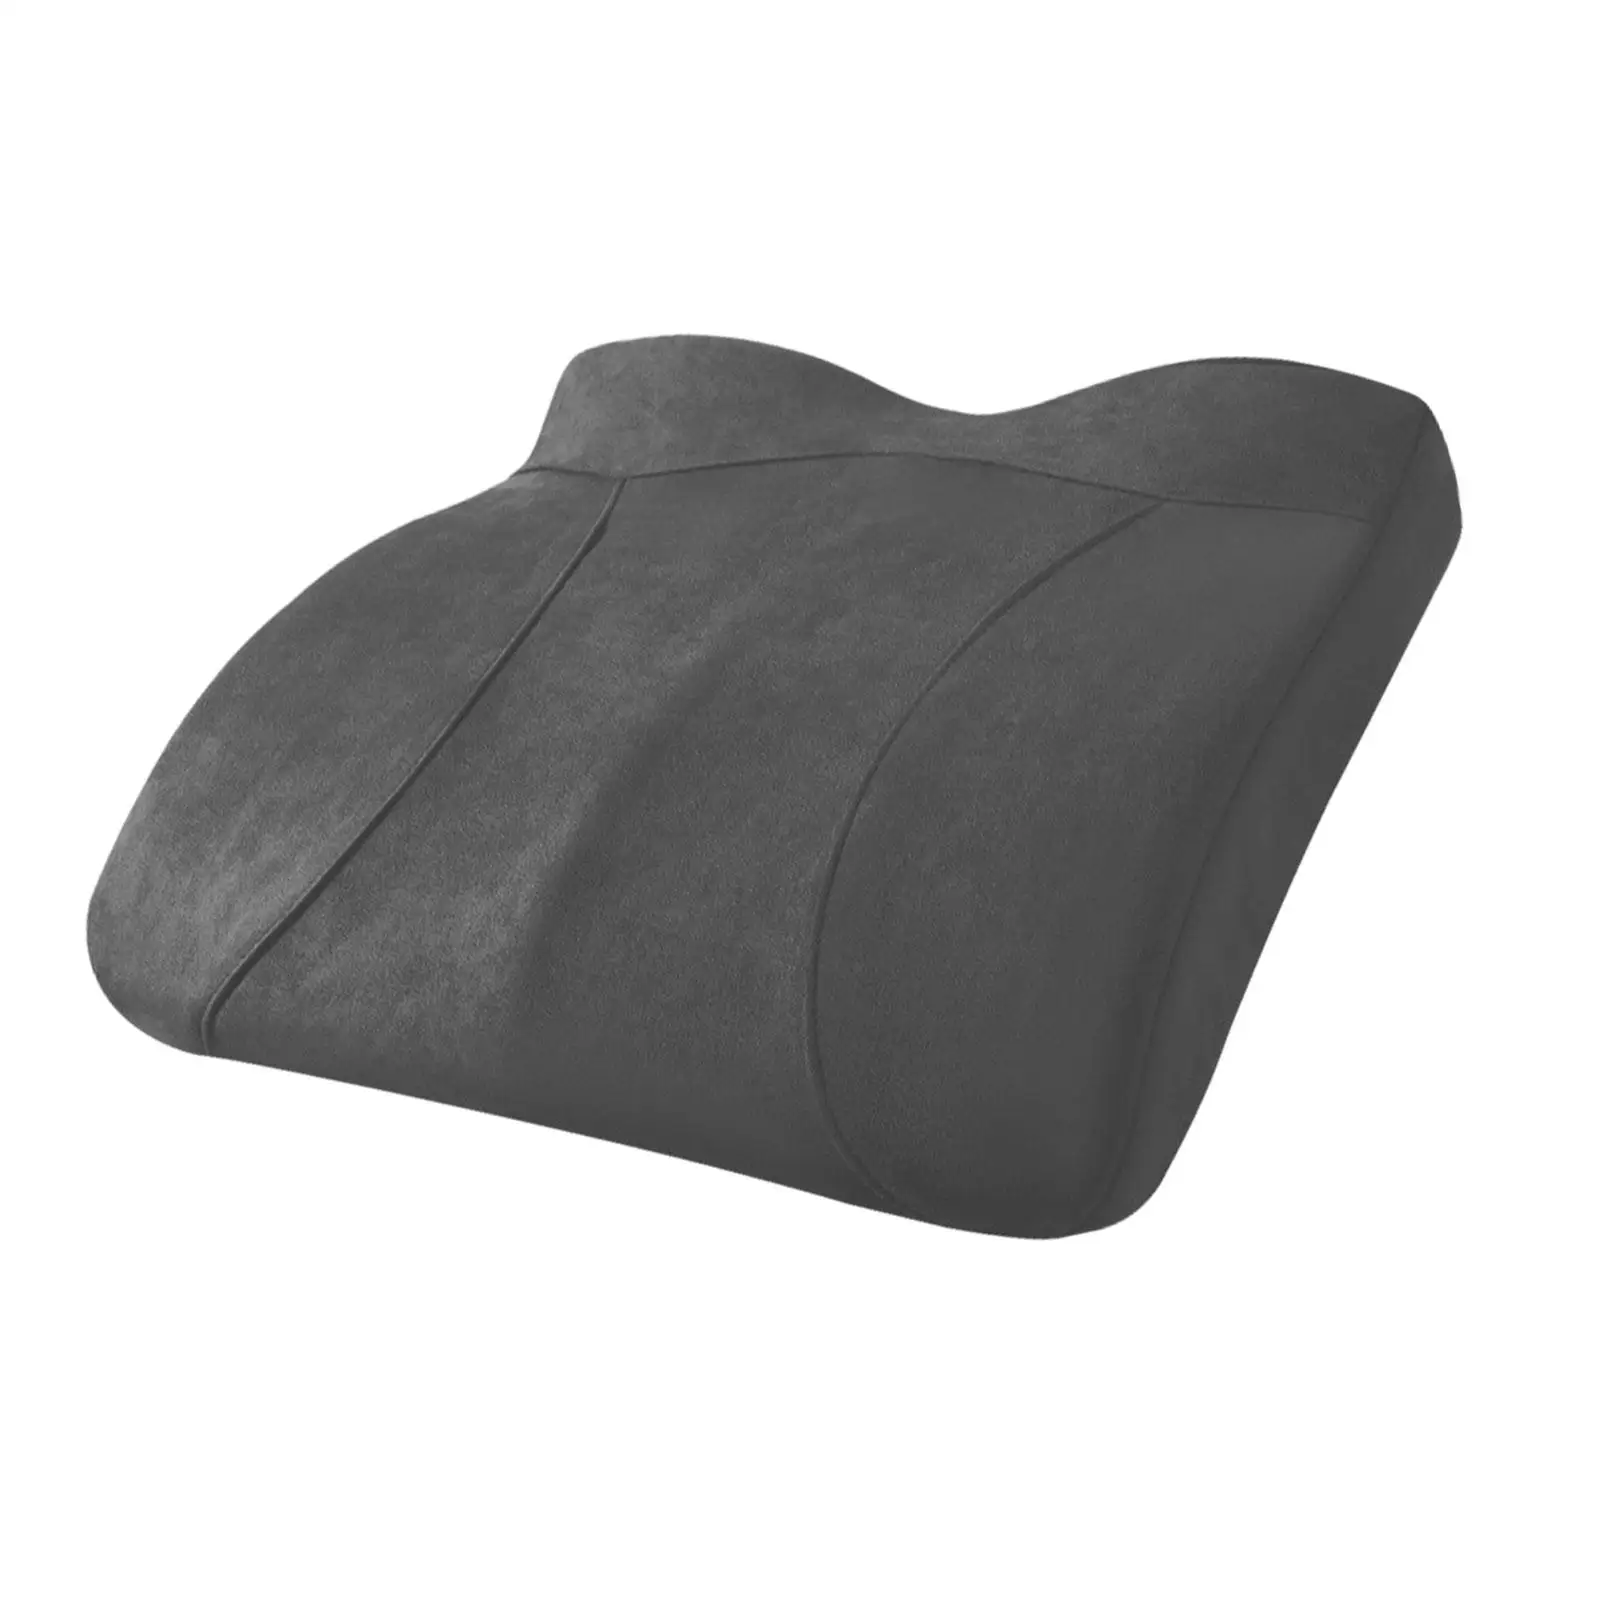 Car Seat Cushion Pad Memory Foam Non Slip Car Driver Seat Car Seat Covers Auto Seat Pad Protective Mat Office/Home Chair Seat